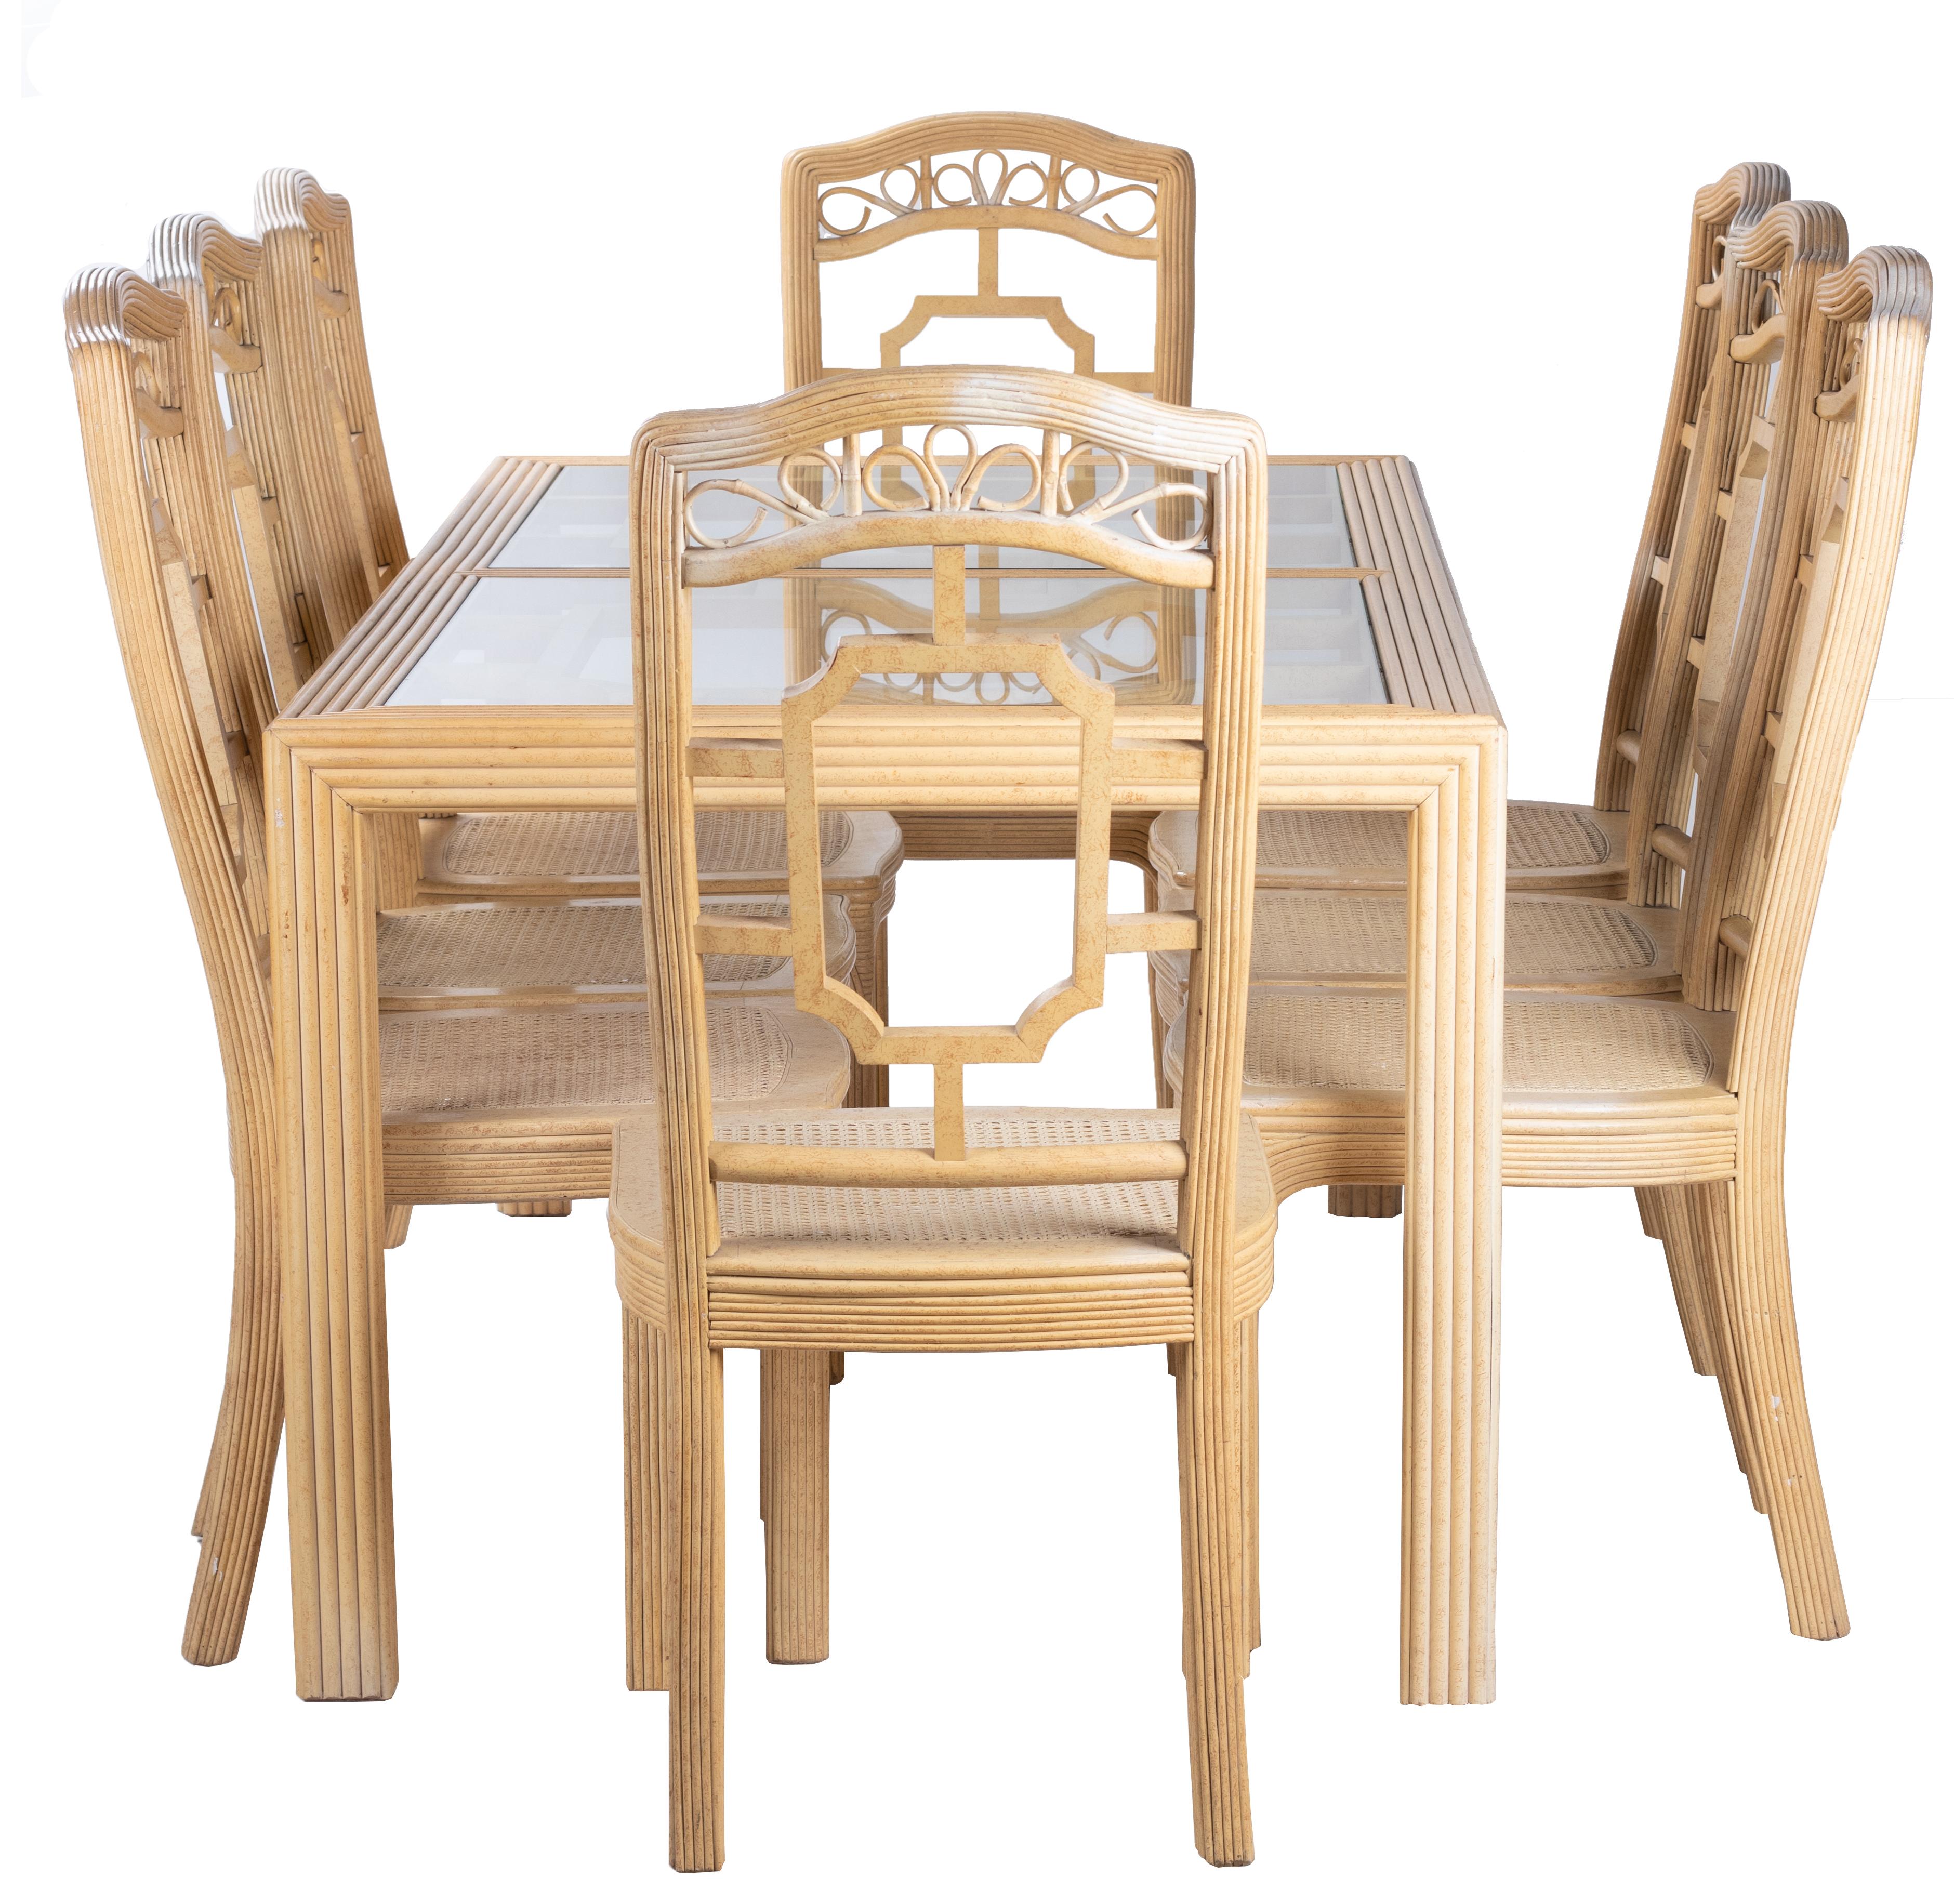 1970s oriental style bamboo dining set composed of eight chairs and table, bought in Harrod's, London.      
  